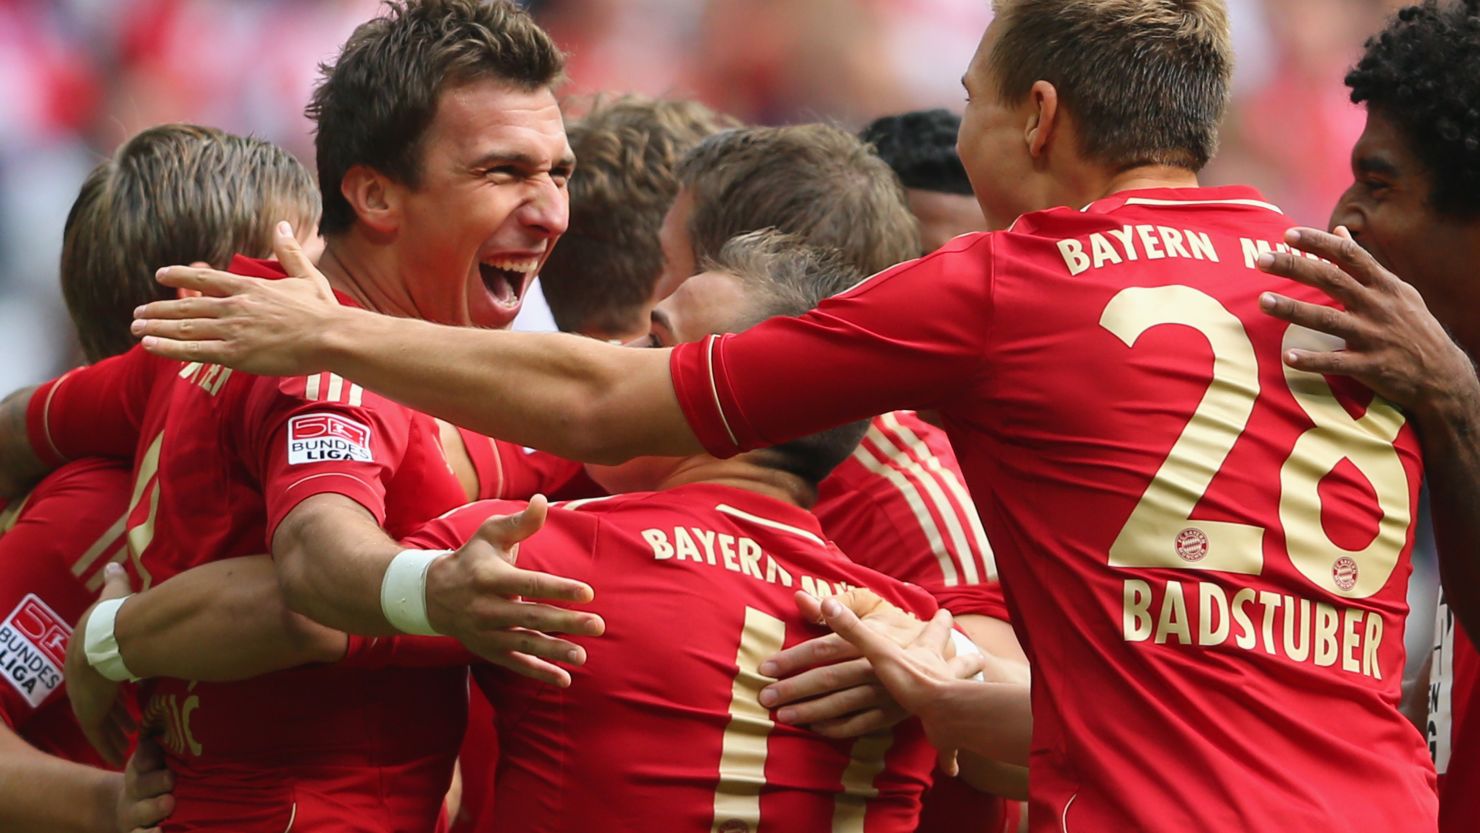 Mario Mandzukic (left) celebrates with his teammates after putting Bayern ahead in the second minute against Mainz 